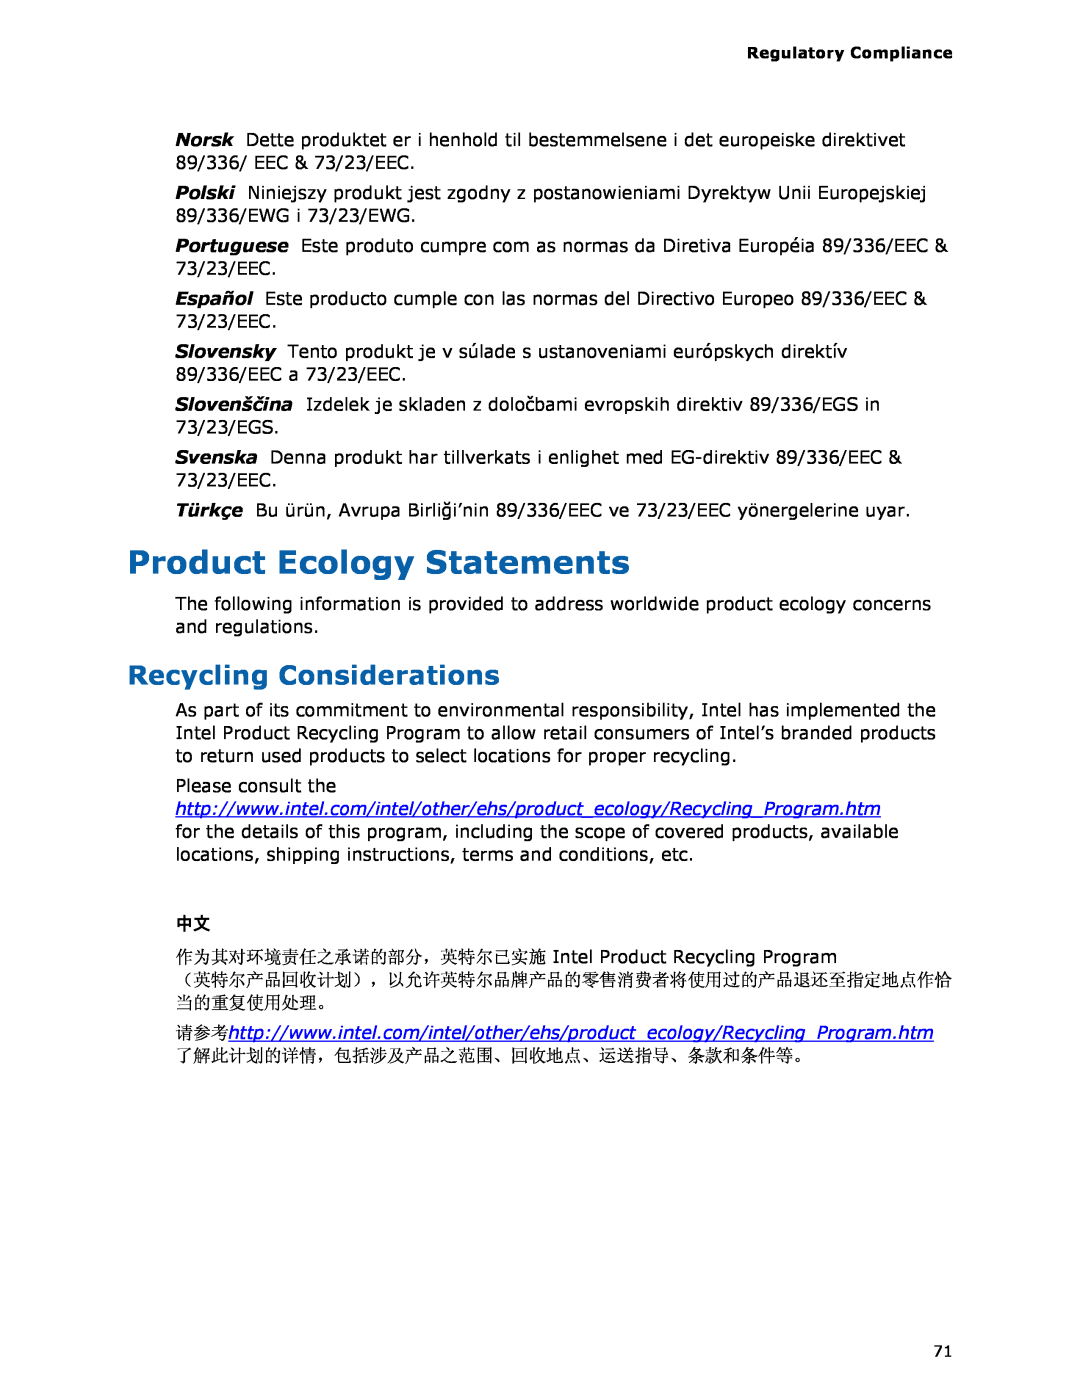 Intel D975XBX2 manual Product Ecology Statements, Recycling Considerations 